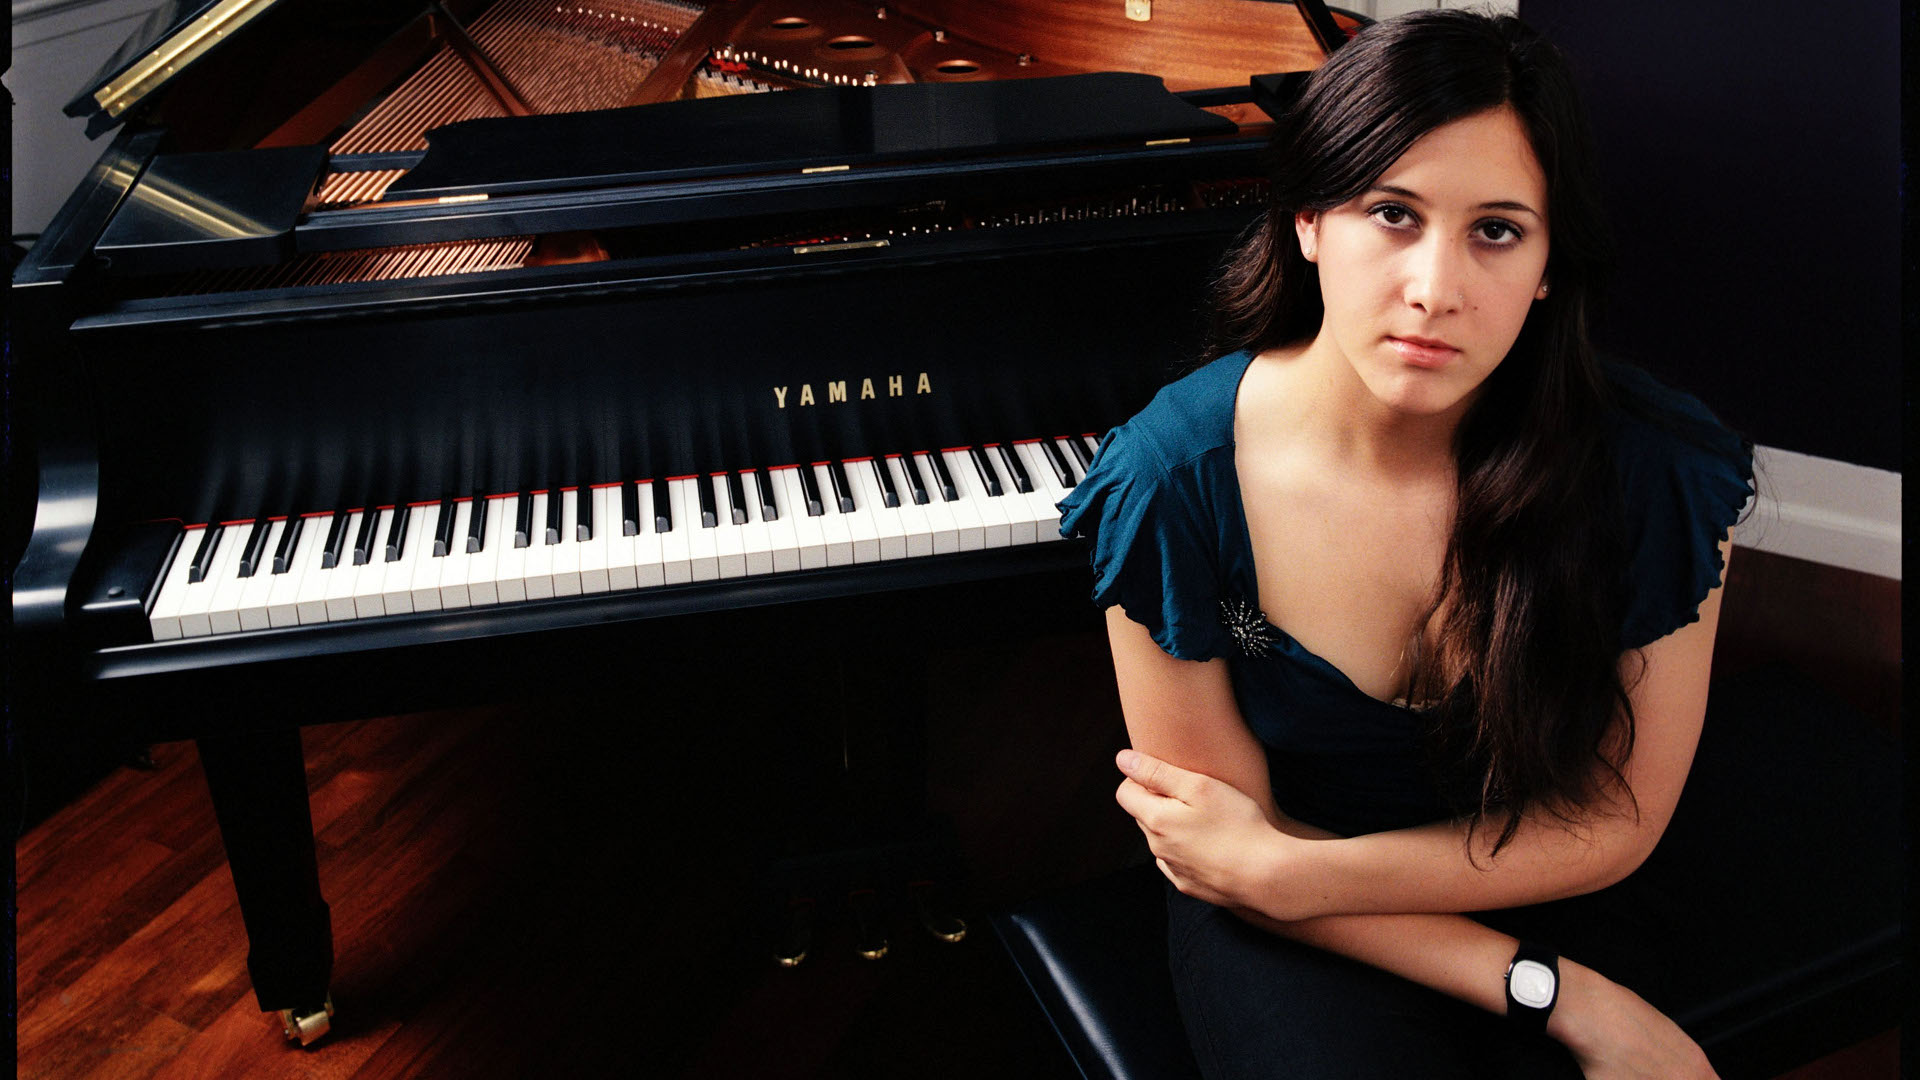 A Thousand Words with Vanessa Carlton | The Emory Wheel